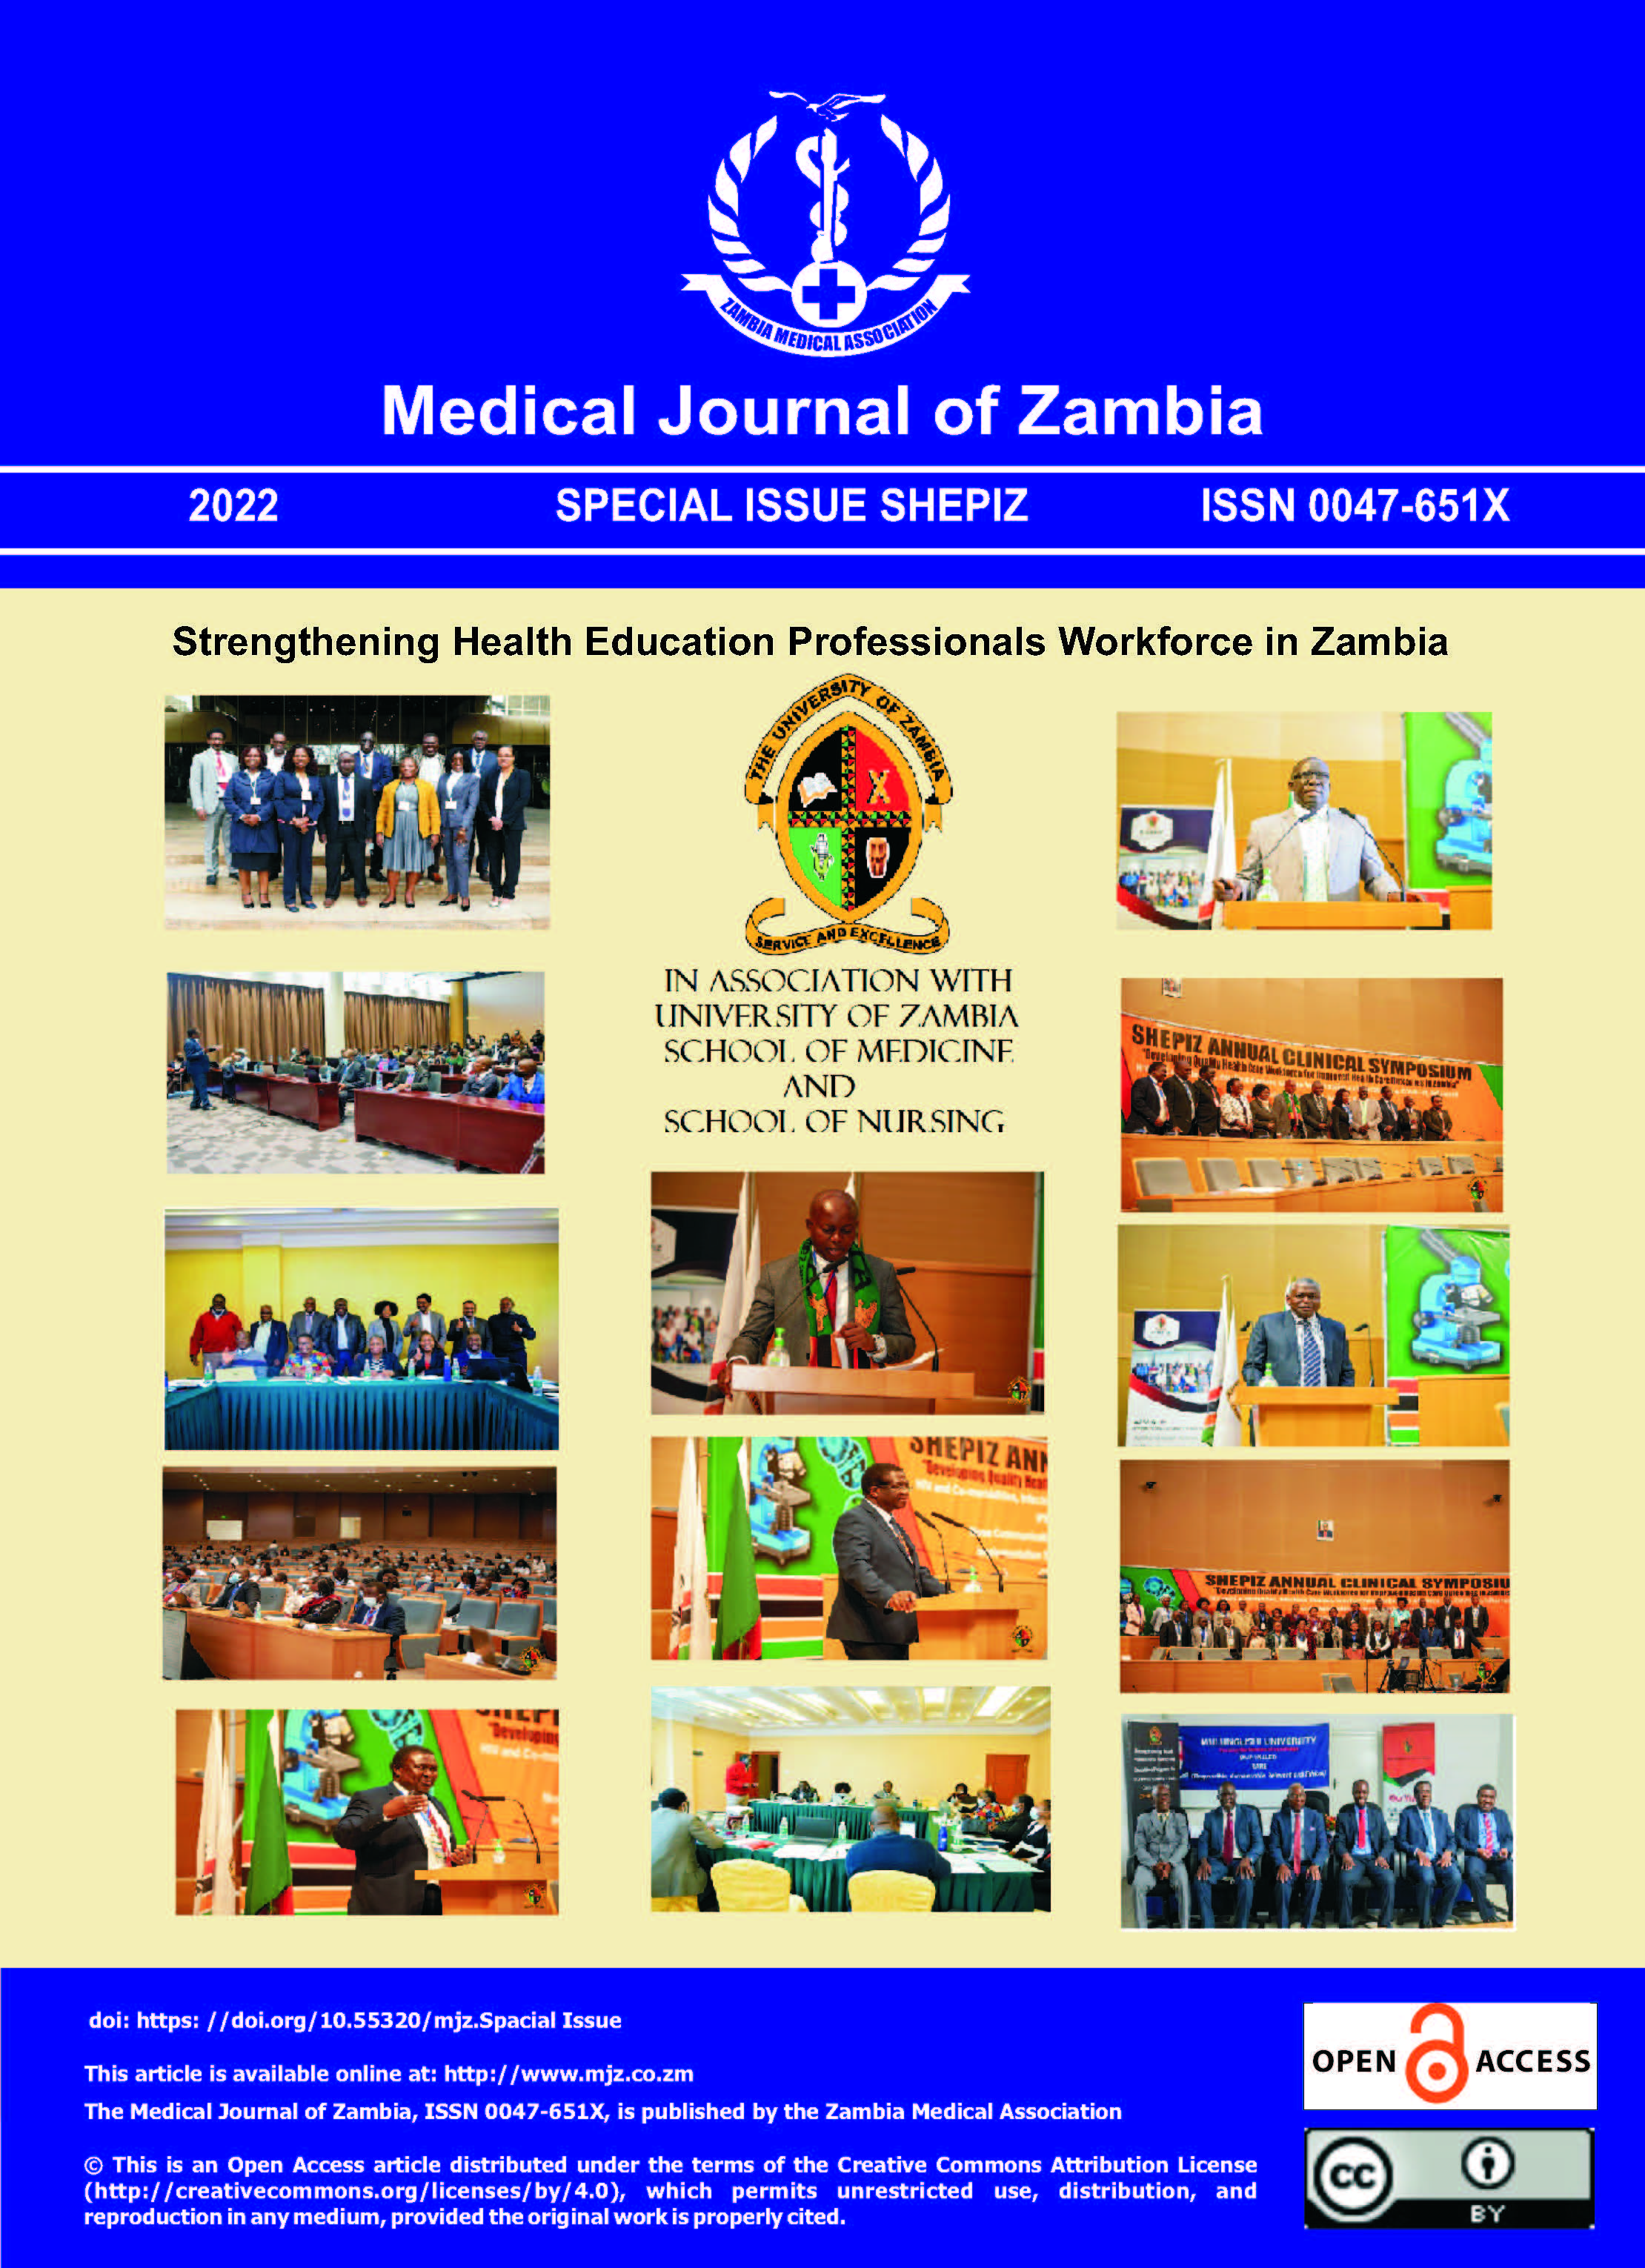 					View 2022: Strengthening Health Professional Workforce Education Programs for Improved Quality Health care in Zambia (SHEPIZ)
				